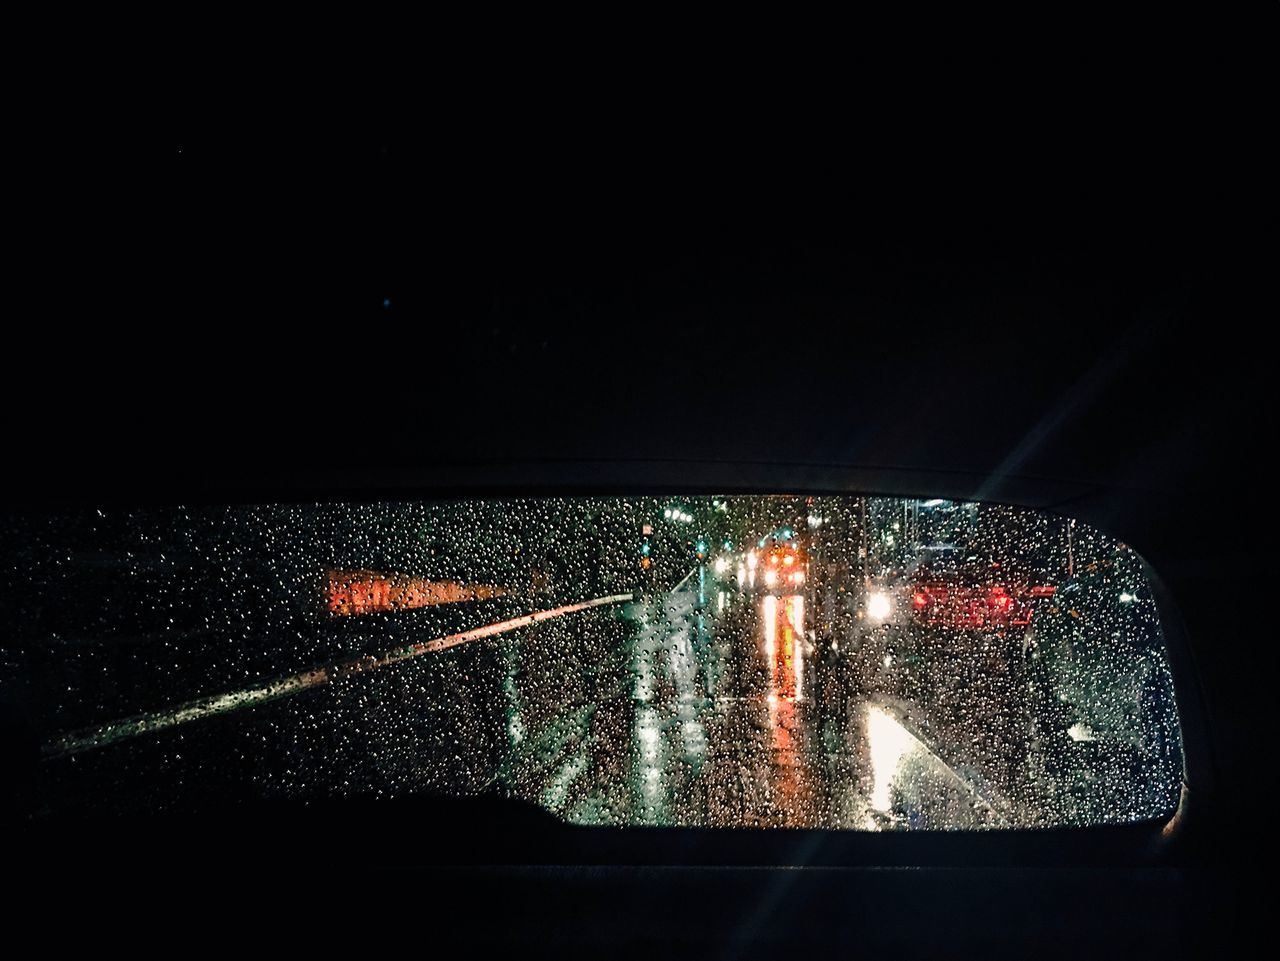 Road seen through wet rear windshield of car at night